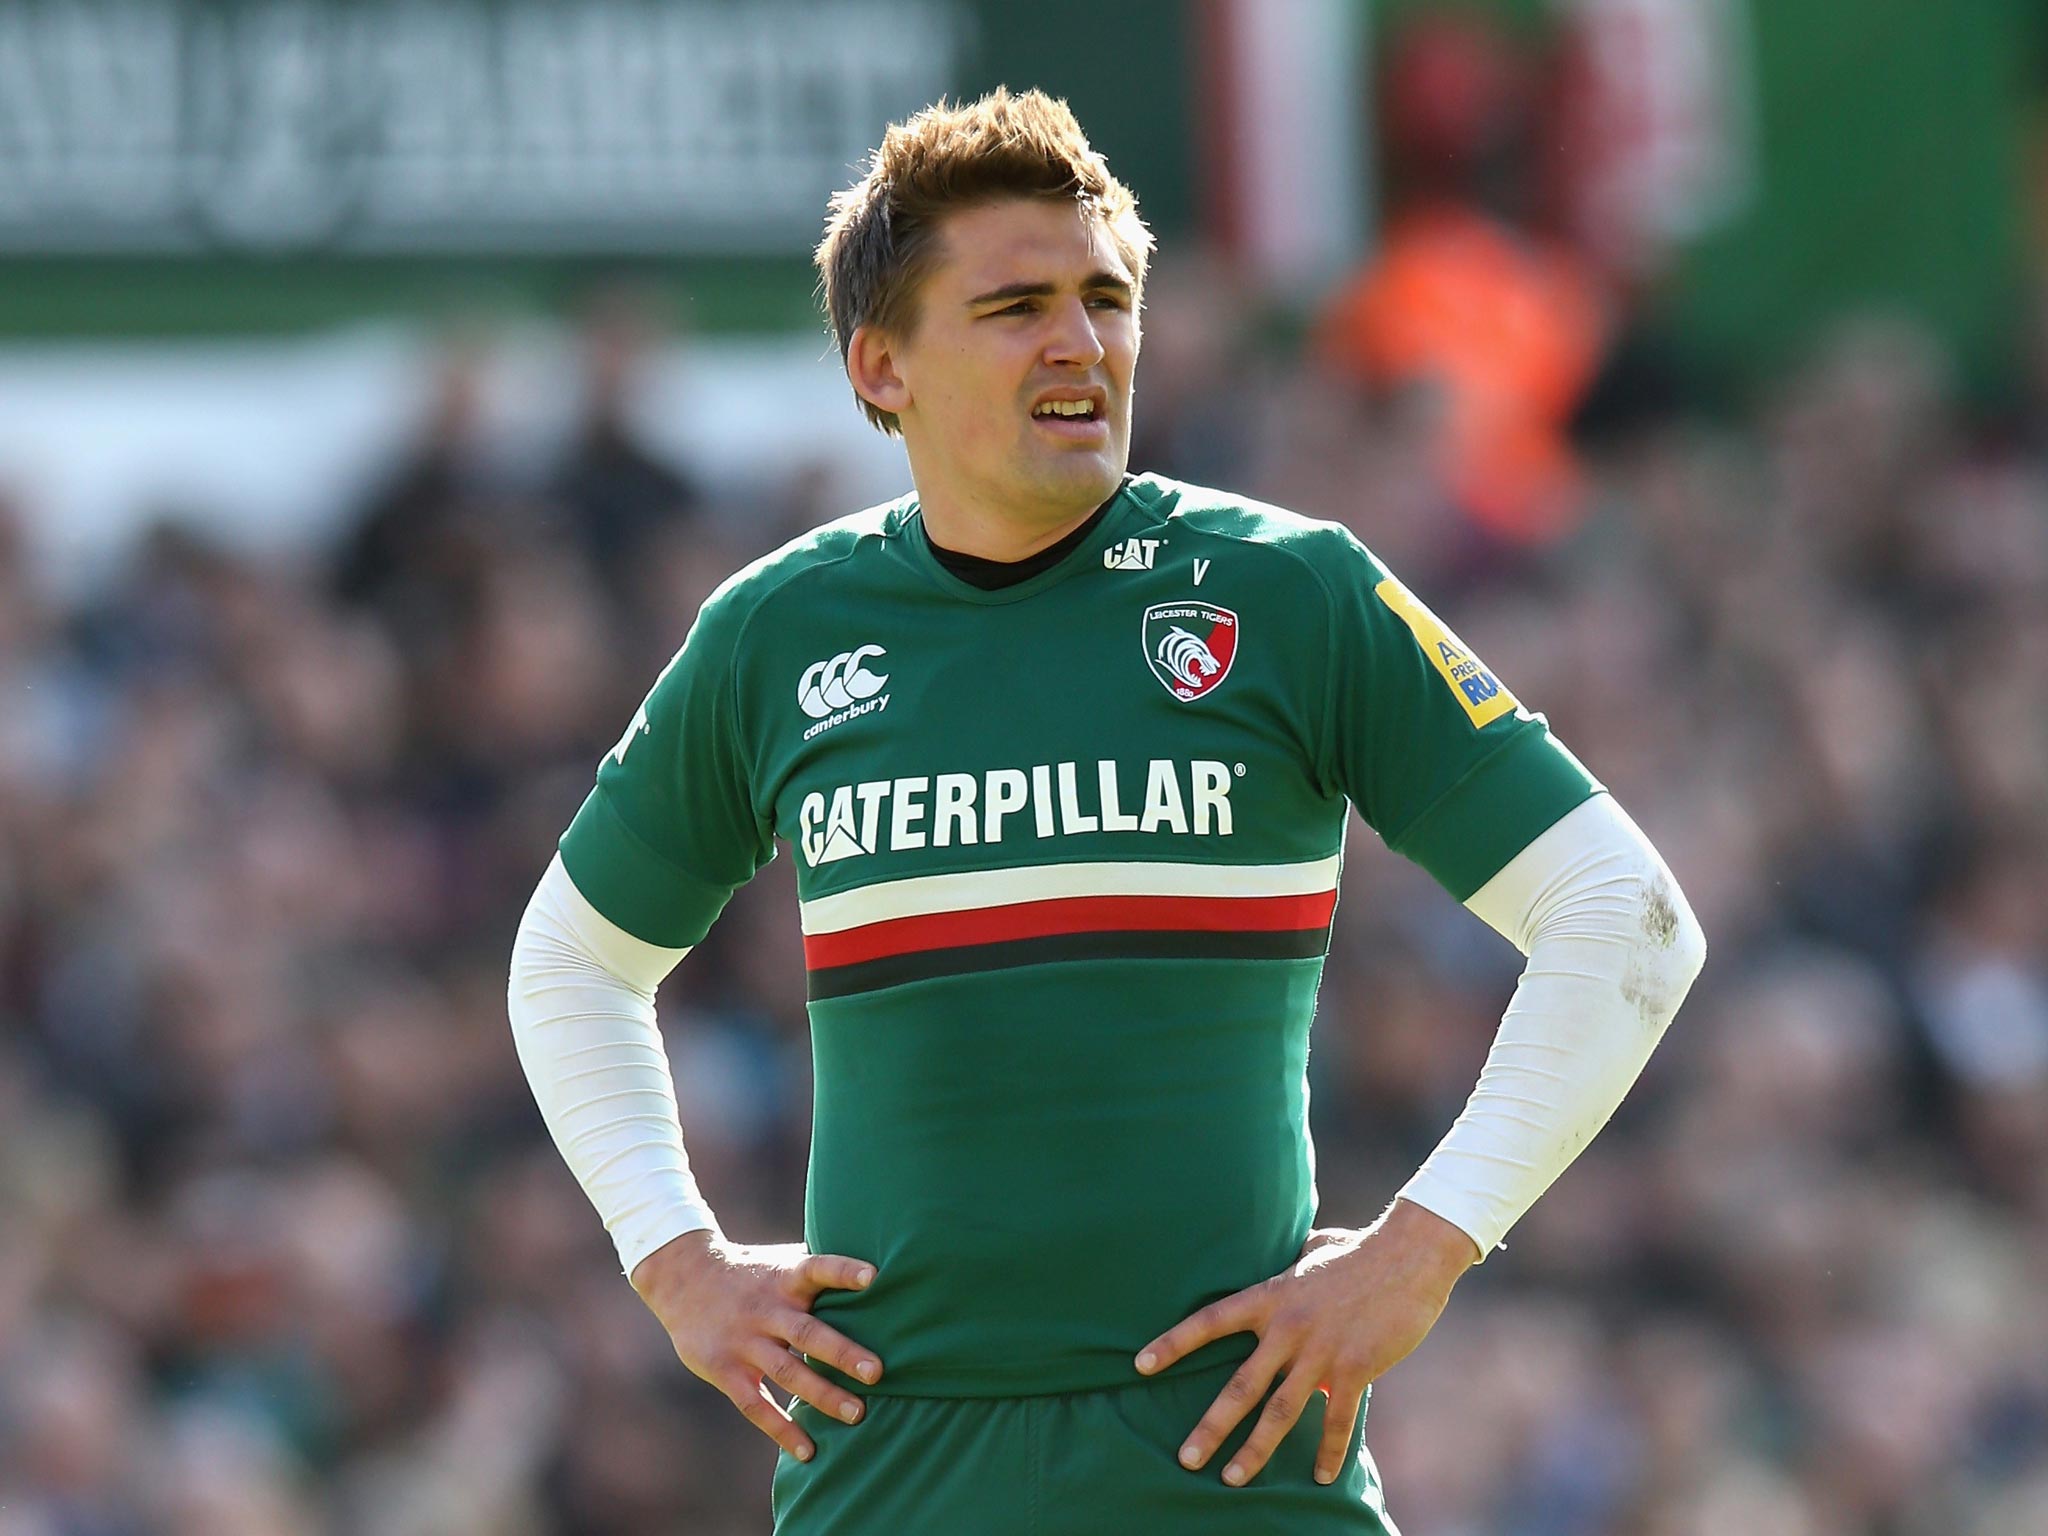 Leicester hope that the France-bound Toby Flood can help them conquer Northampton